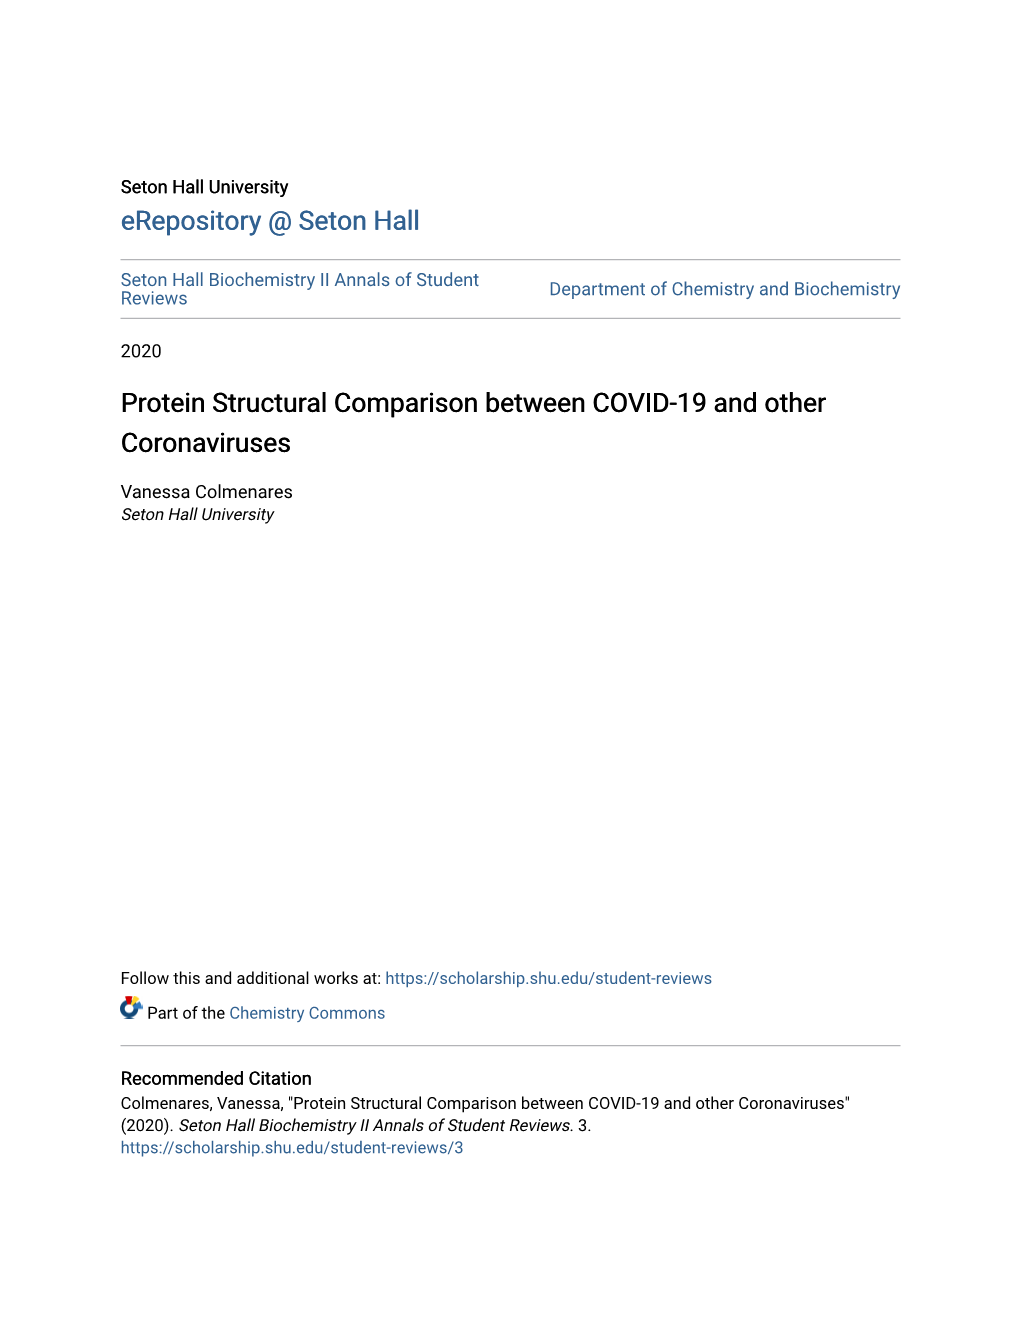 Protein Structural Comparison Between COVID-19 and Other Coronaviruses